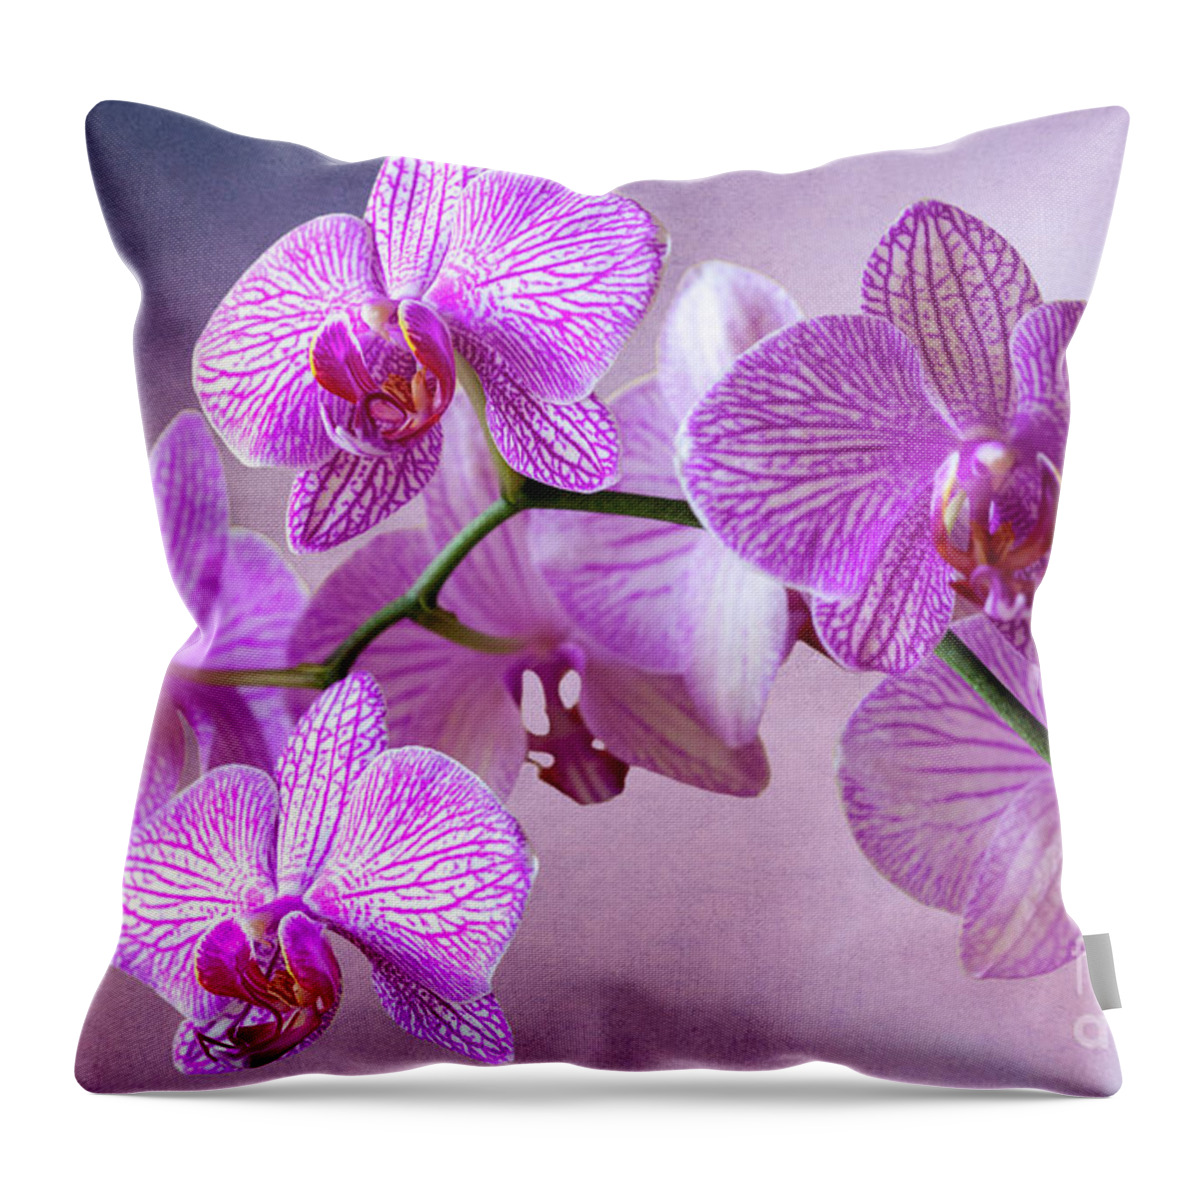 Orchid Throw Pillow featuring the photograph Phalaenopsis Pink Balanz by Heiko Koehrer-Wagner